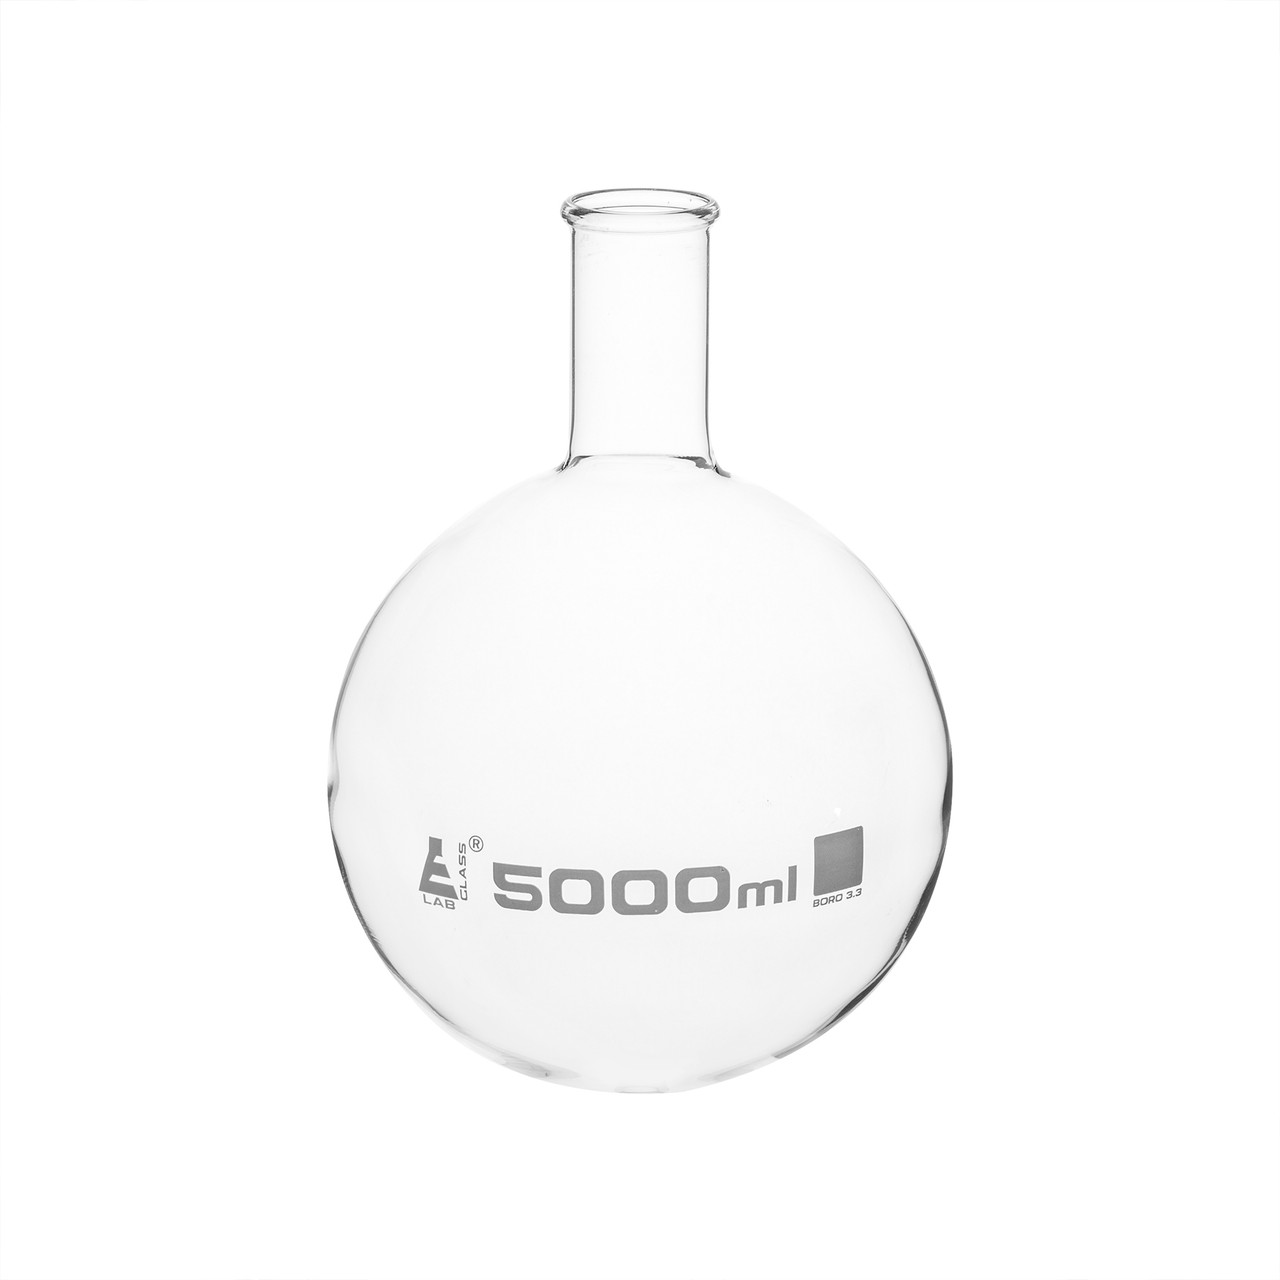 5000ml Borosilicate Wide Mouth Square Glass Storage Bottle with